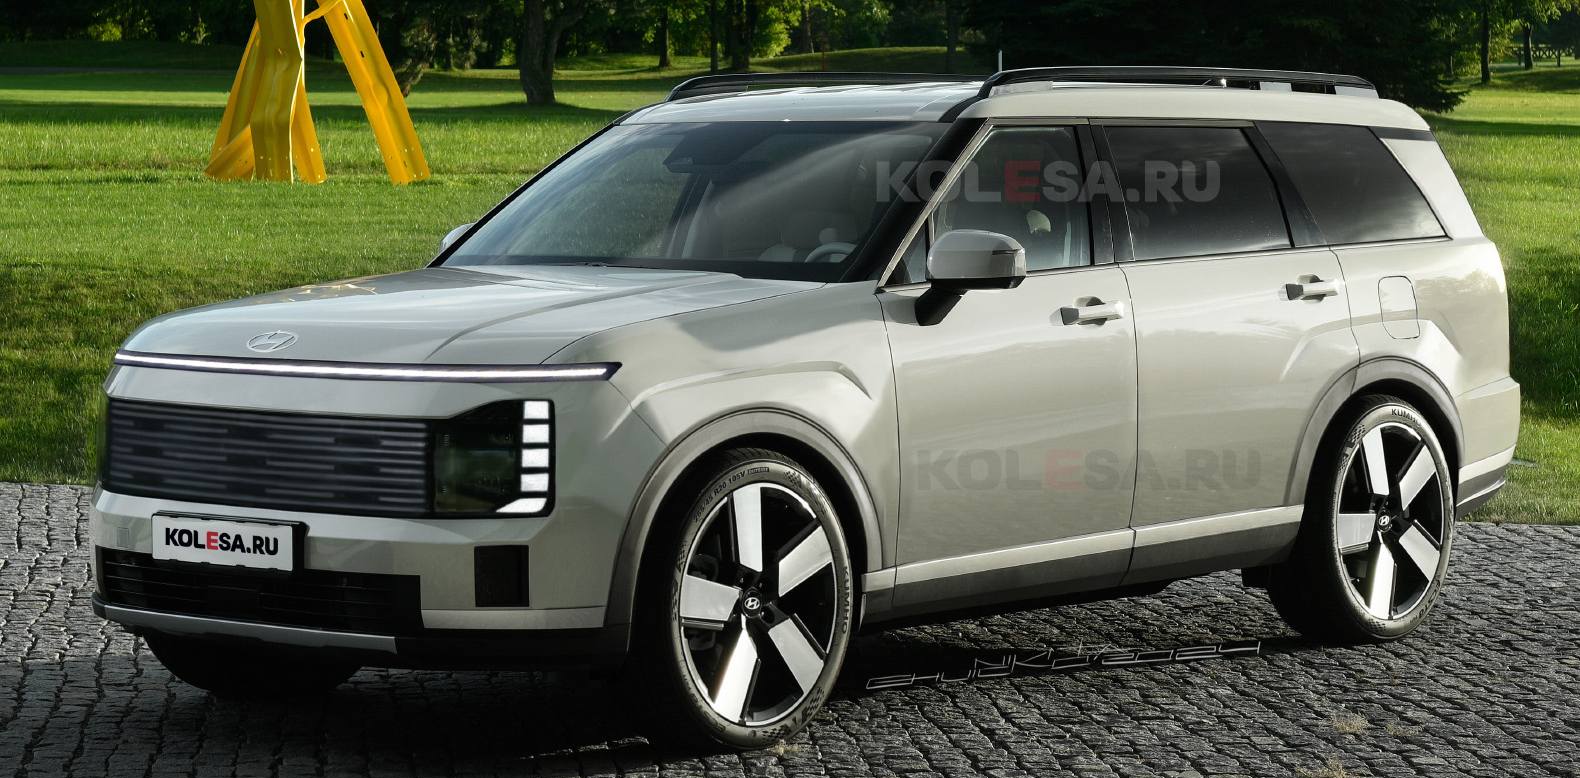 2026-hyundai-palisade-mid-size-cuv-debuts-across-fantasy-land-with-pixelated-styling-236285_1.jpg